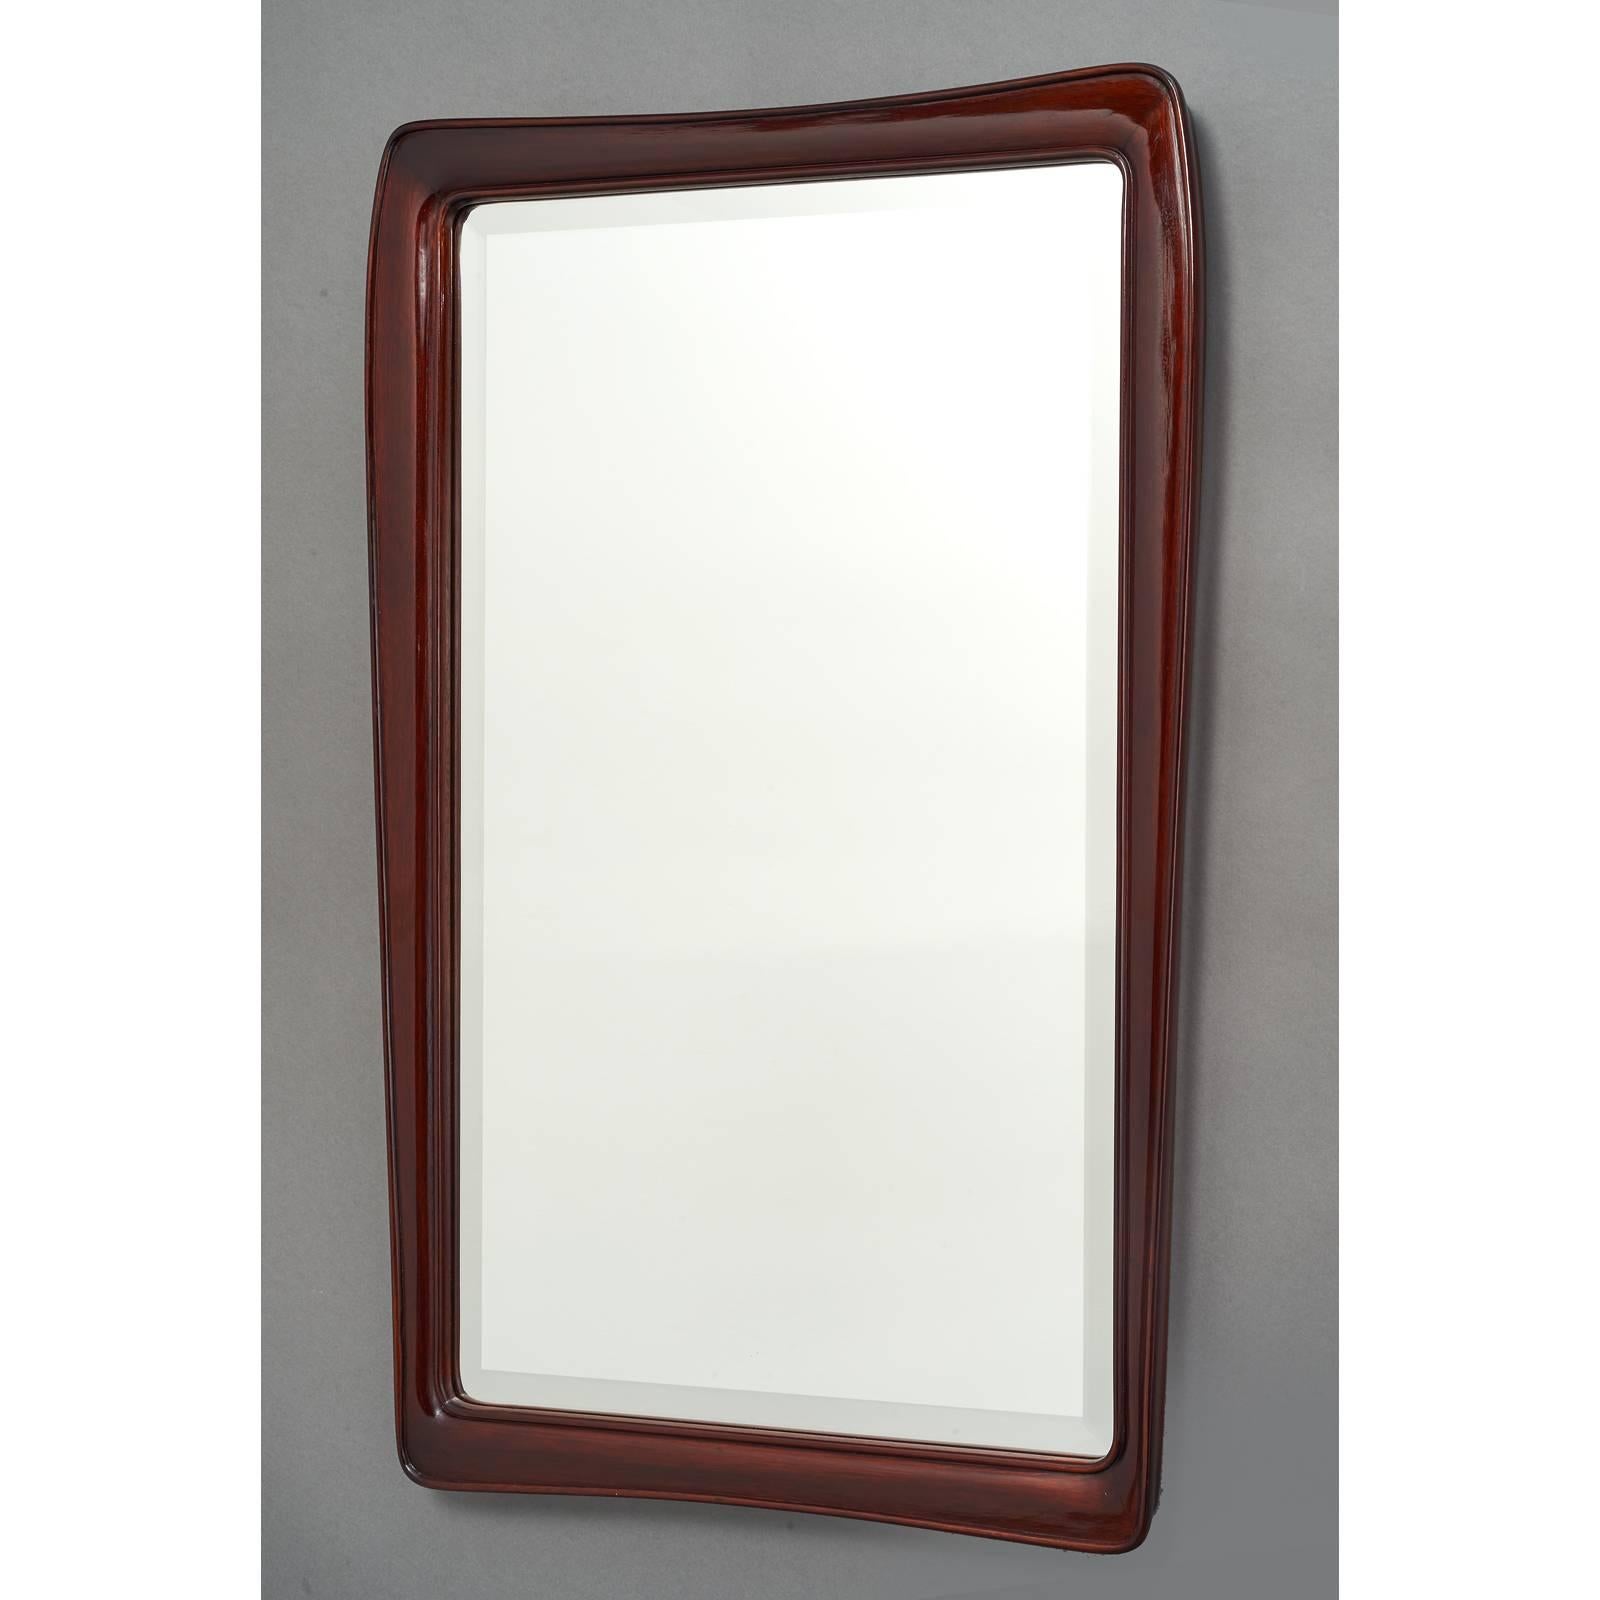 Italy, 1930s.
Handsome liberty style carved mirror in polished mahogany.
Beveled glass.
Measures: 38 x 24.5.